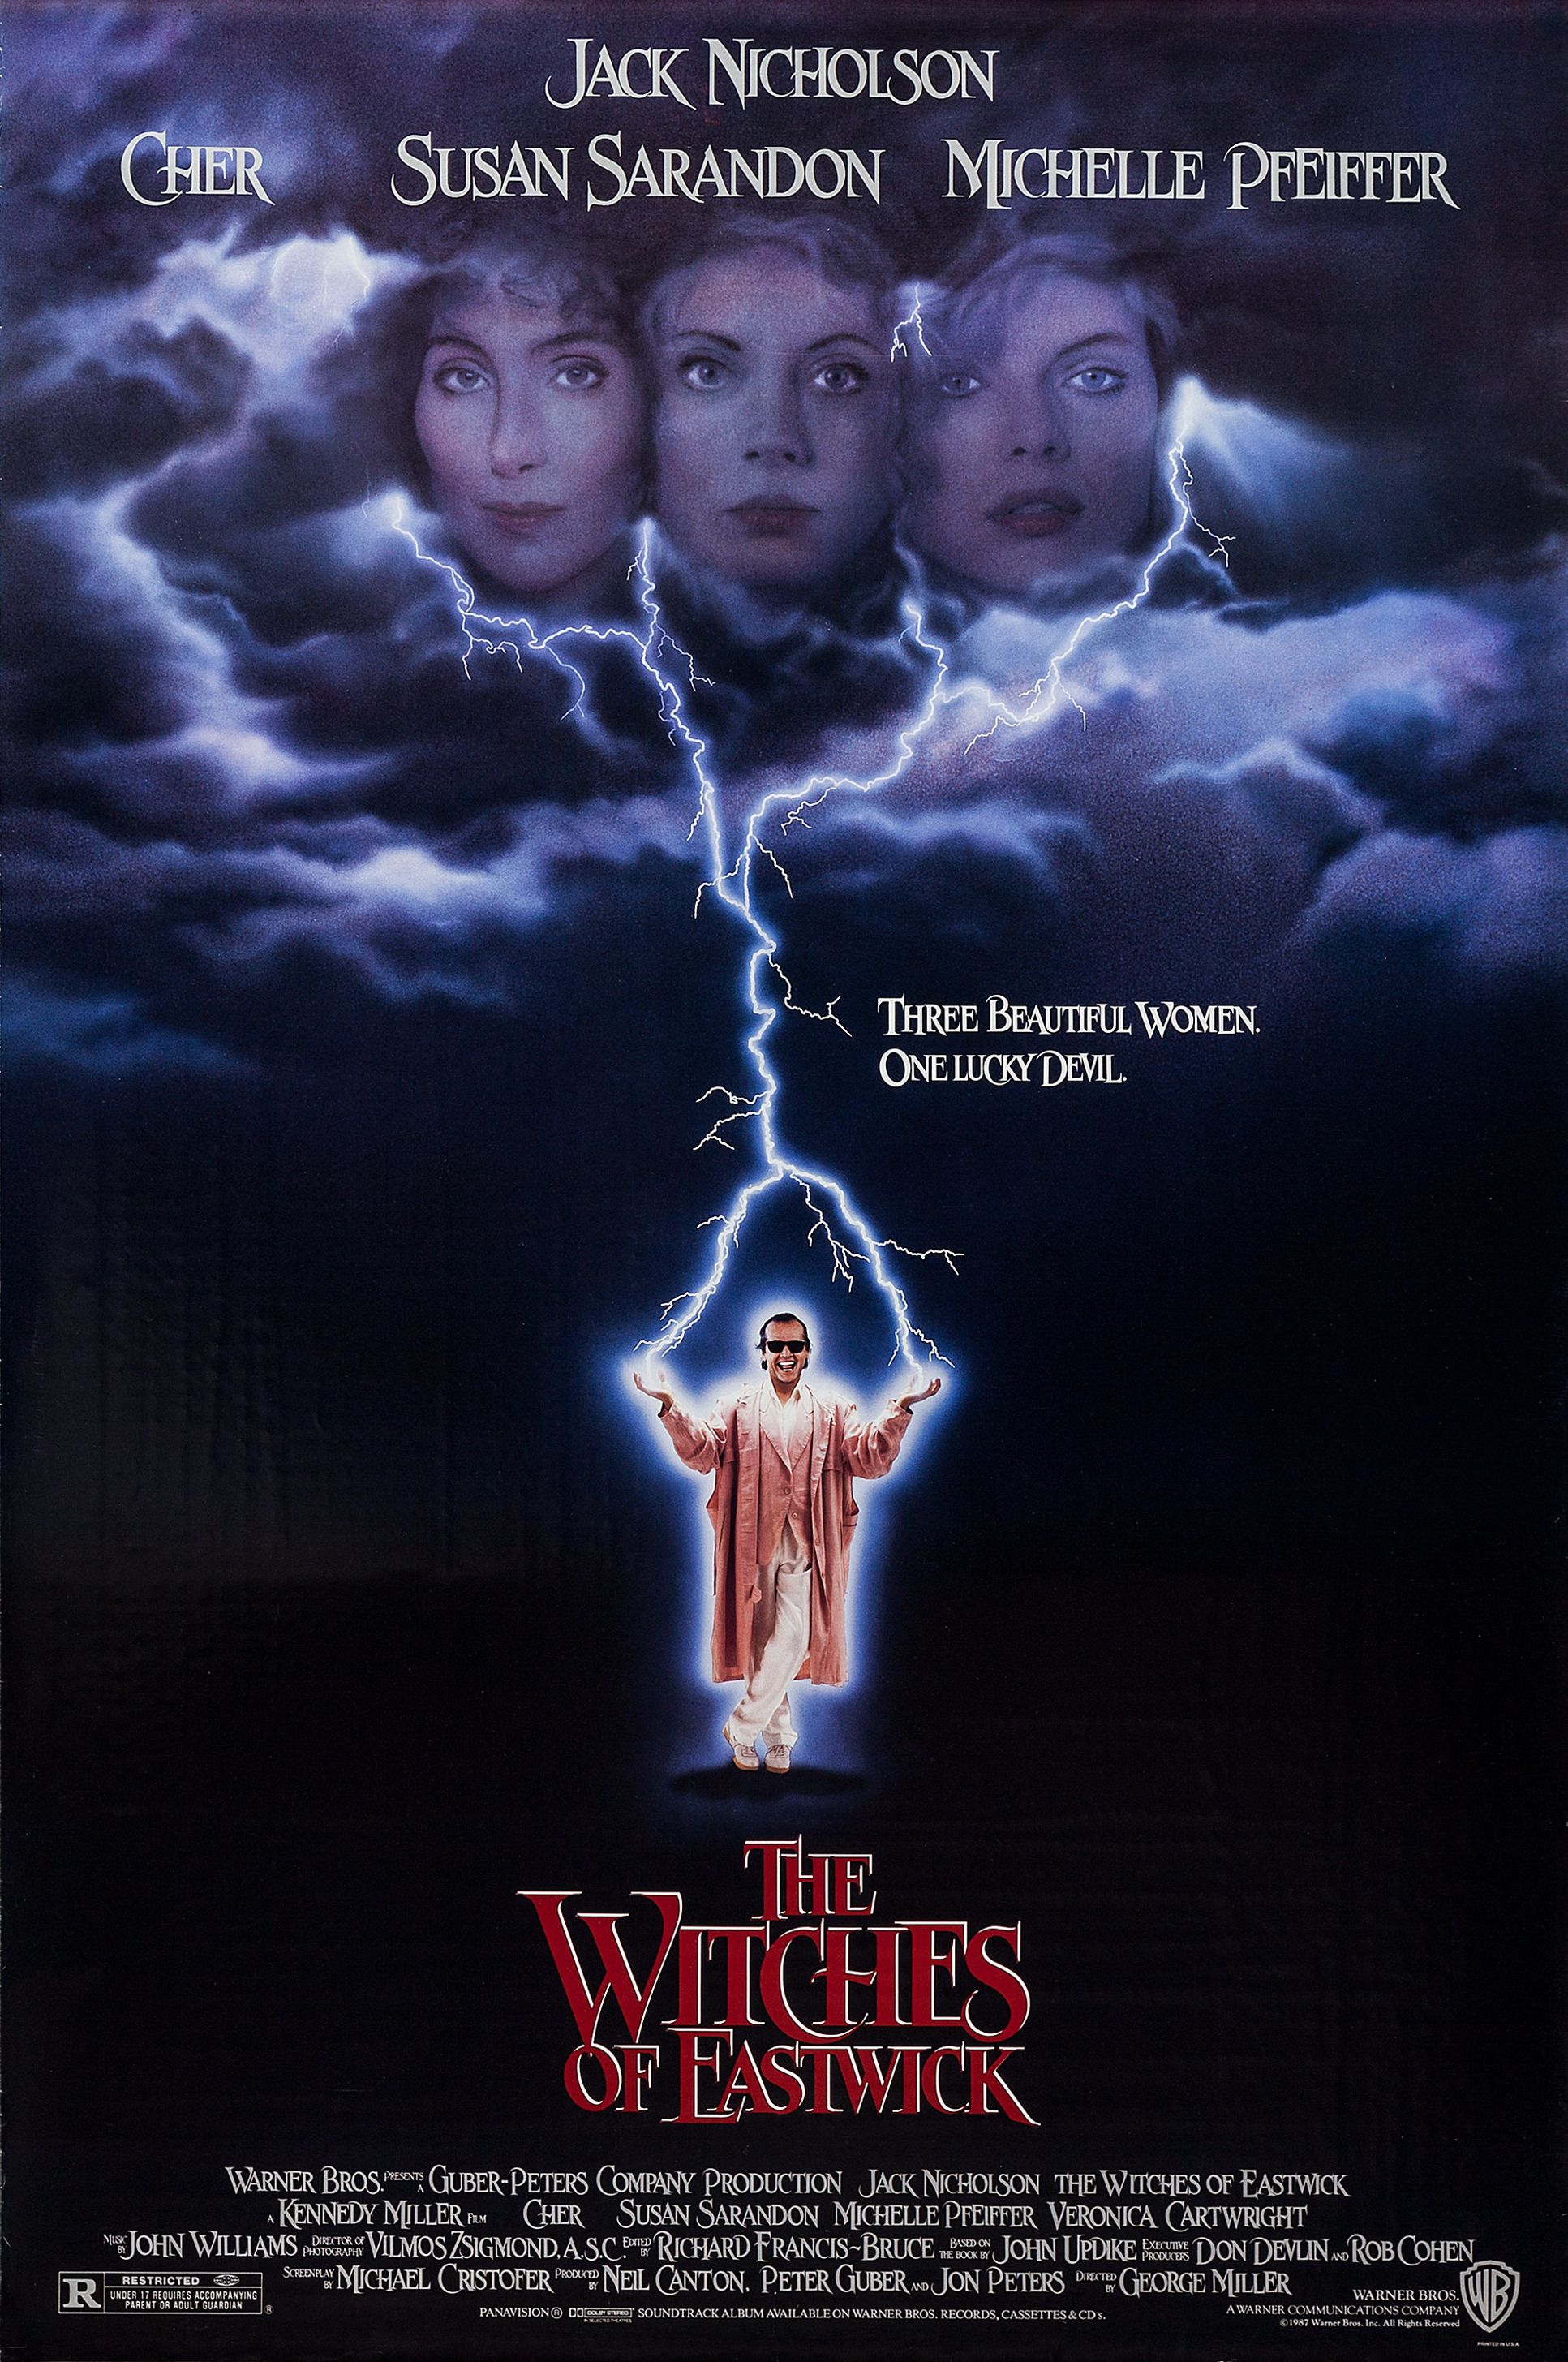 The Witches of Eastwick Film Poster